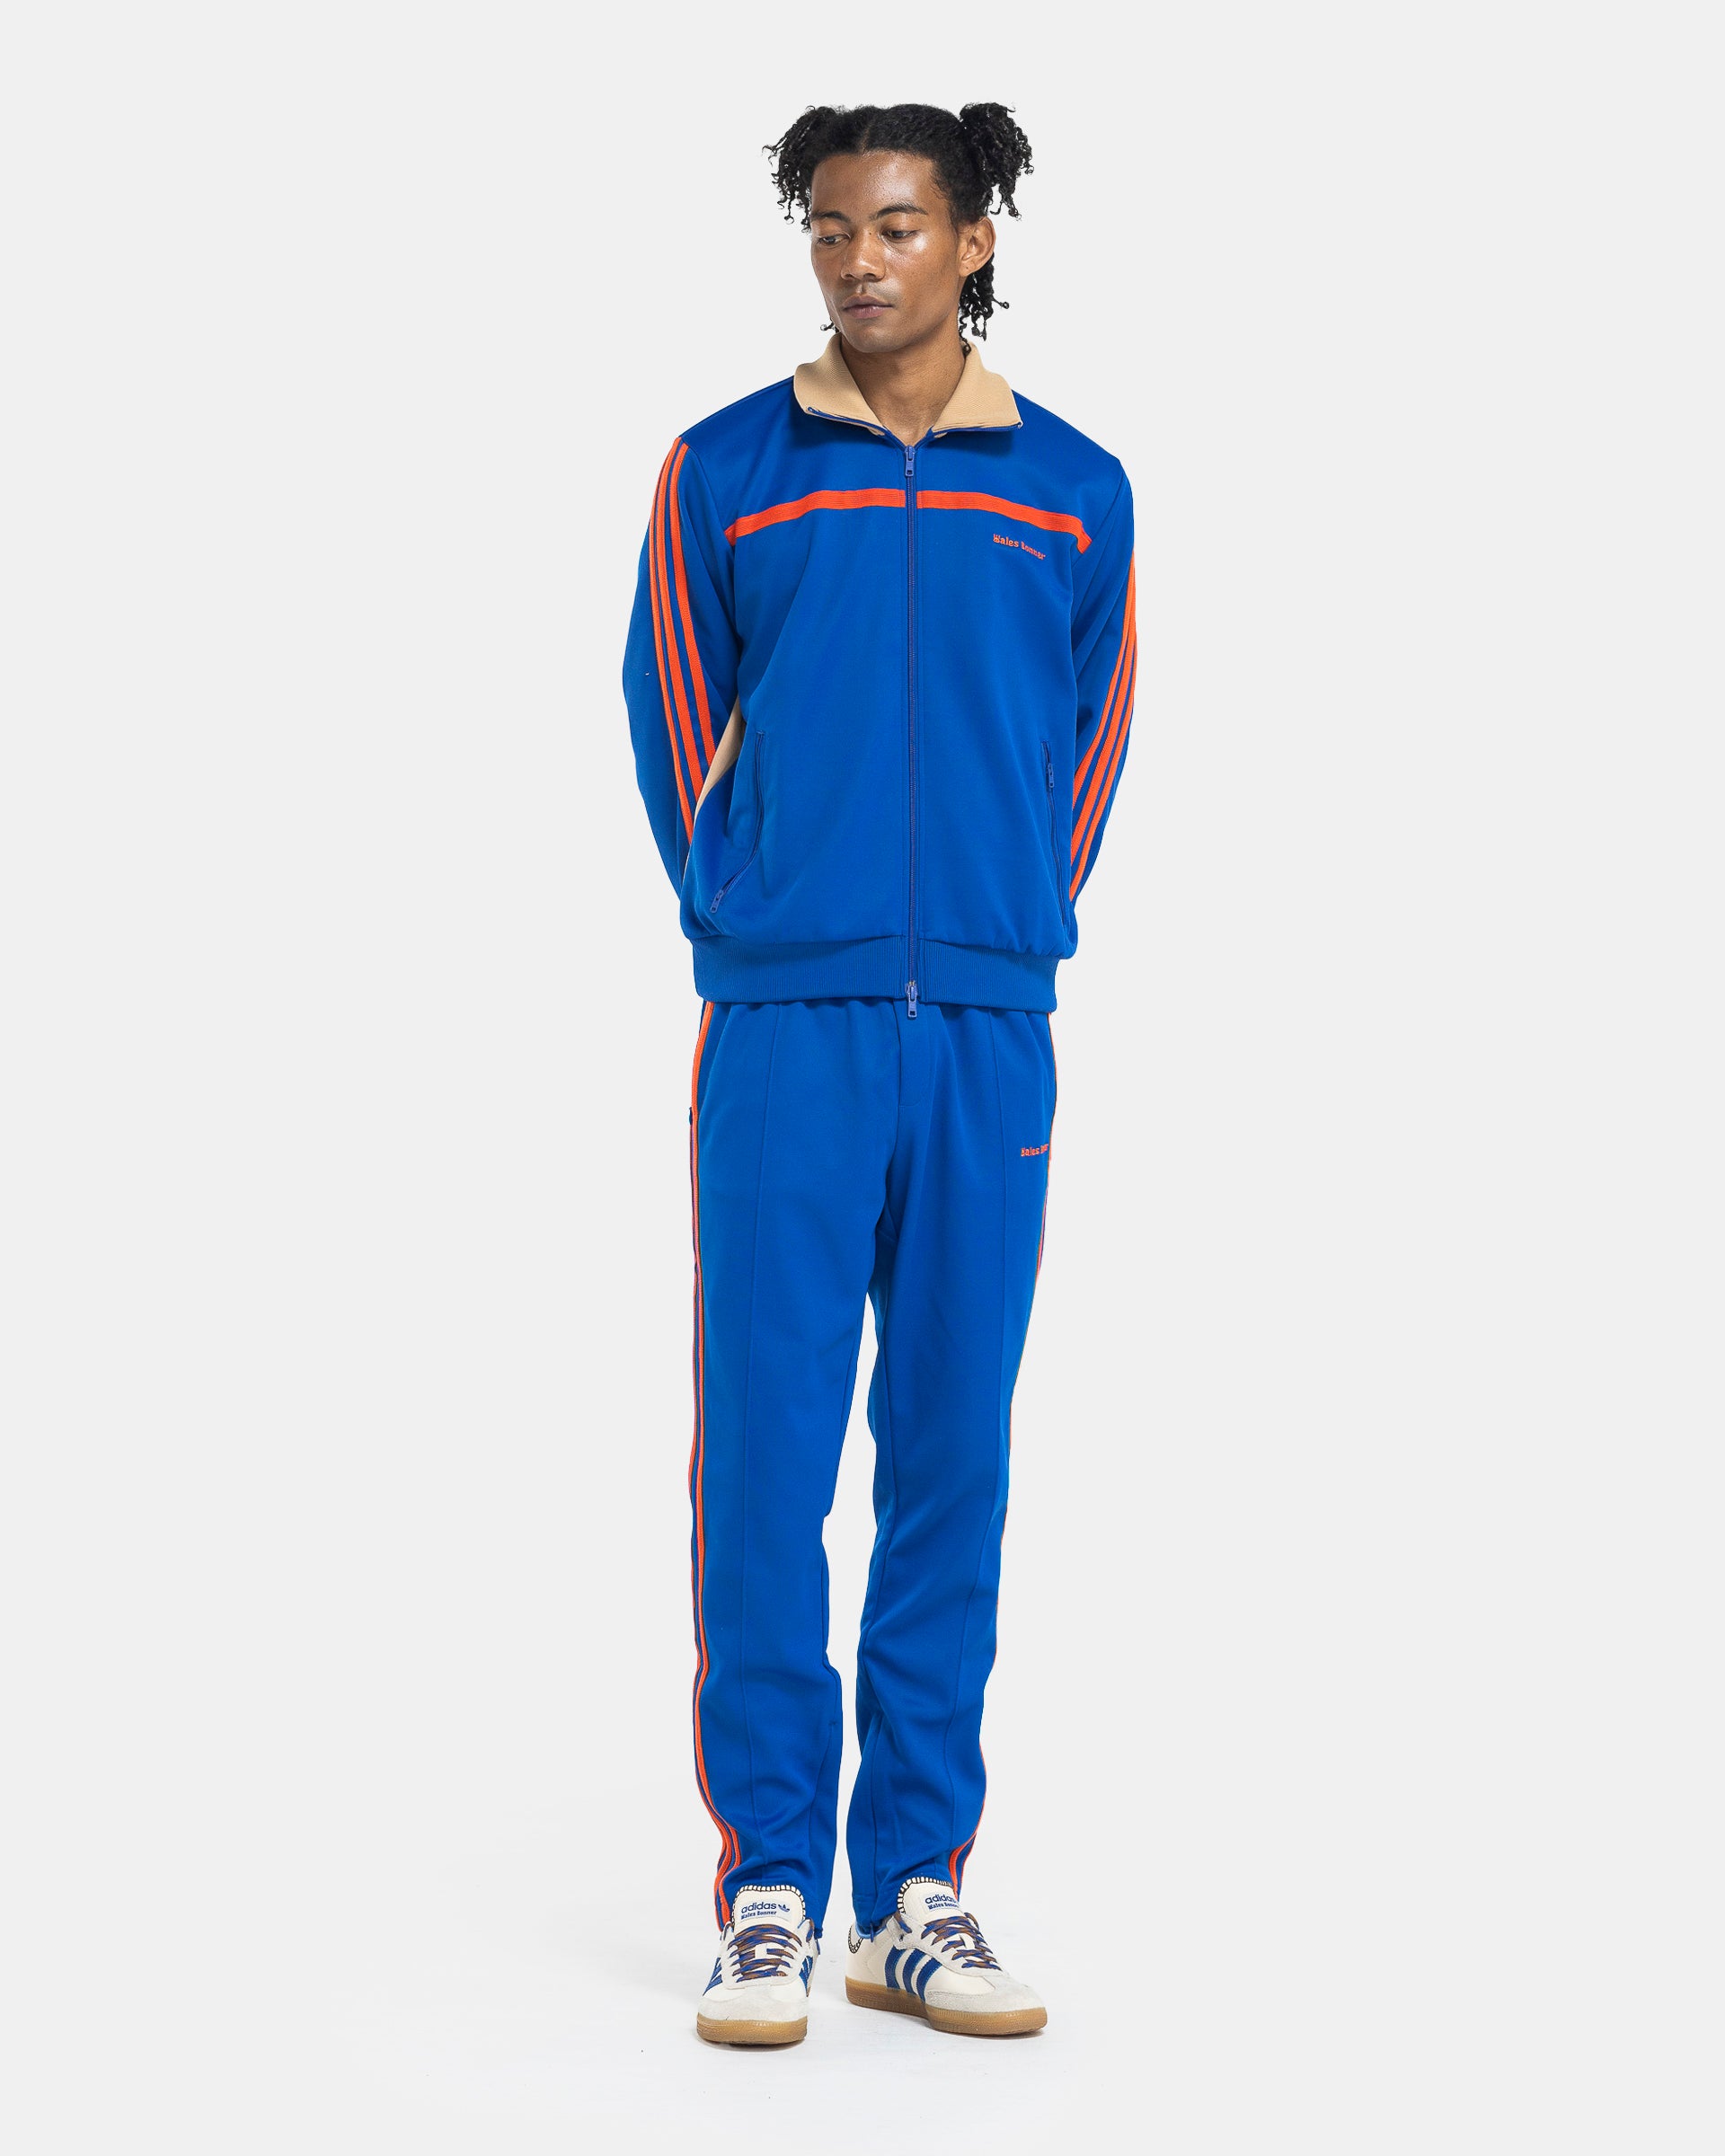 Model wearing Adidas Wales Bonner Jersey Stirrup Track Pant in Team Royal Blue on the white background